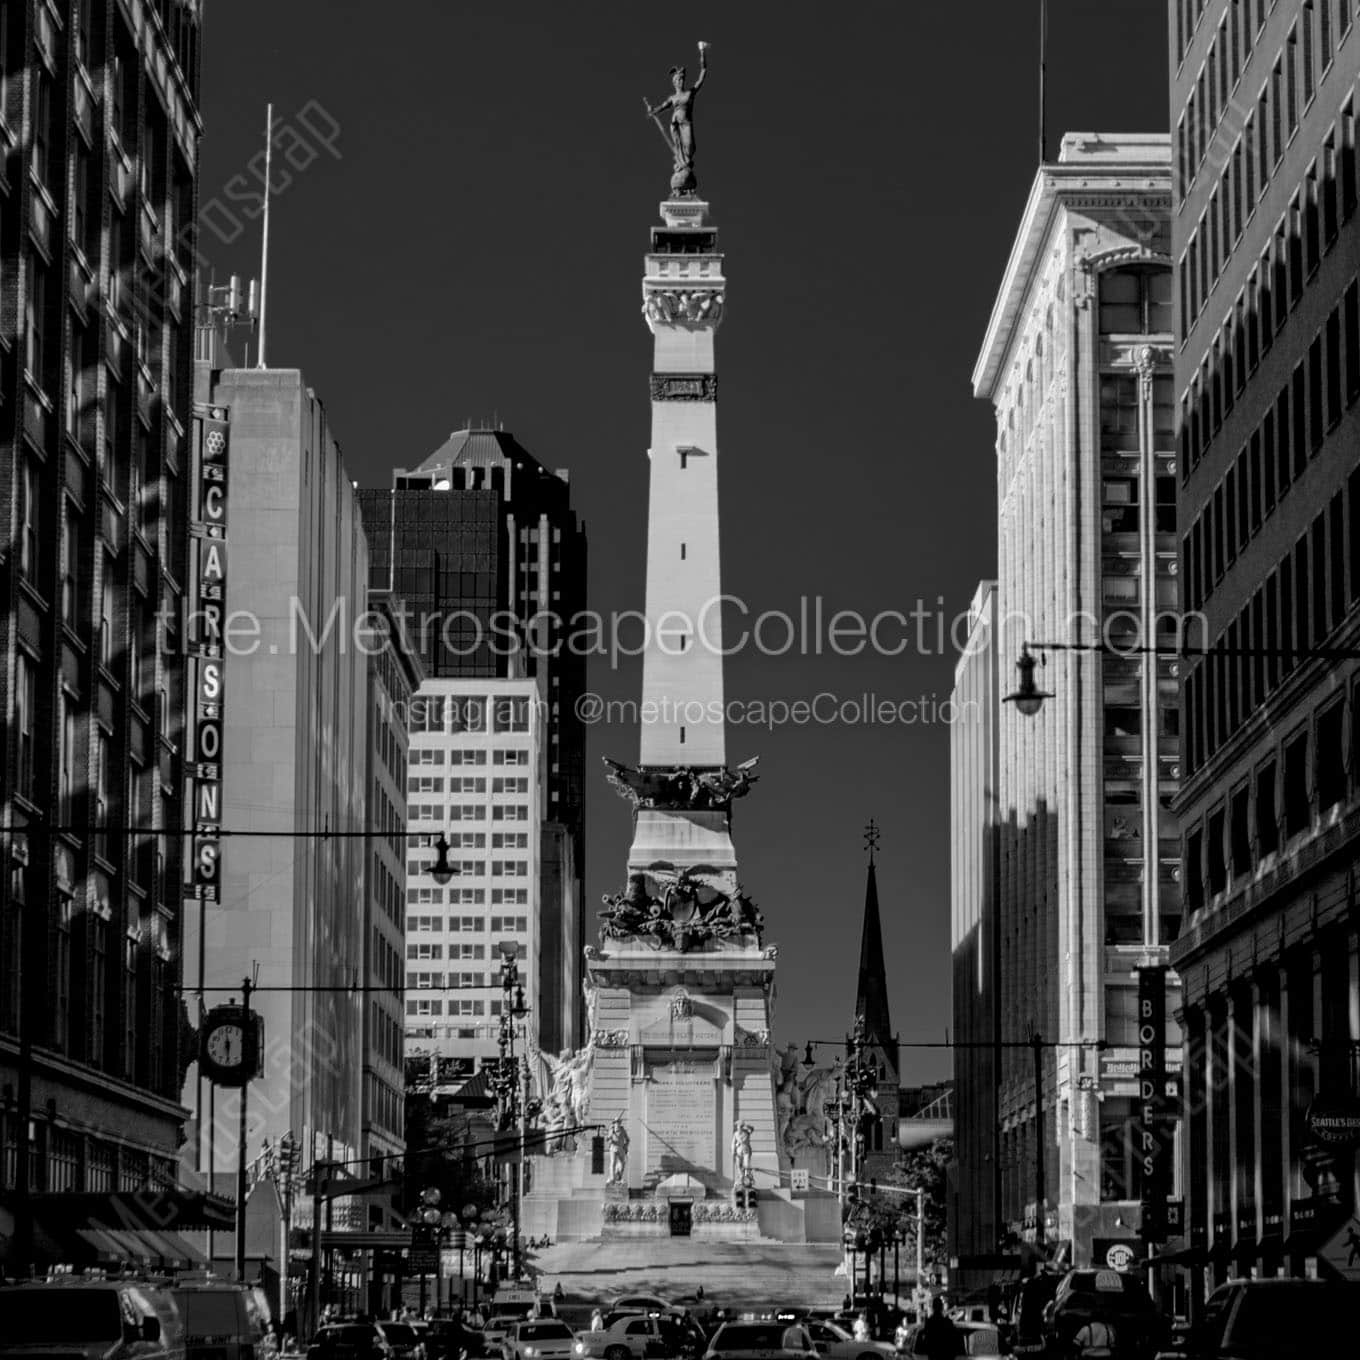 soldiers and sailors monument from meridian street Black & White Office Art